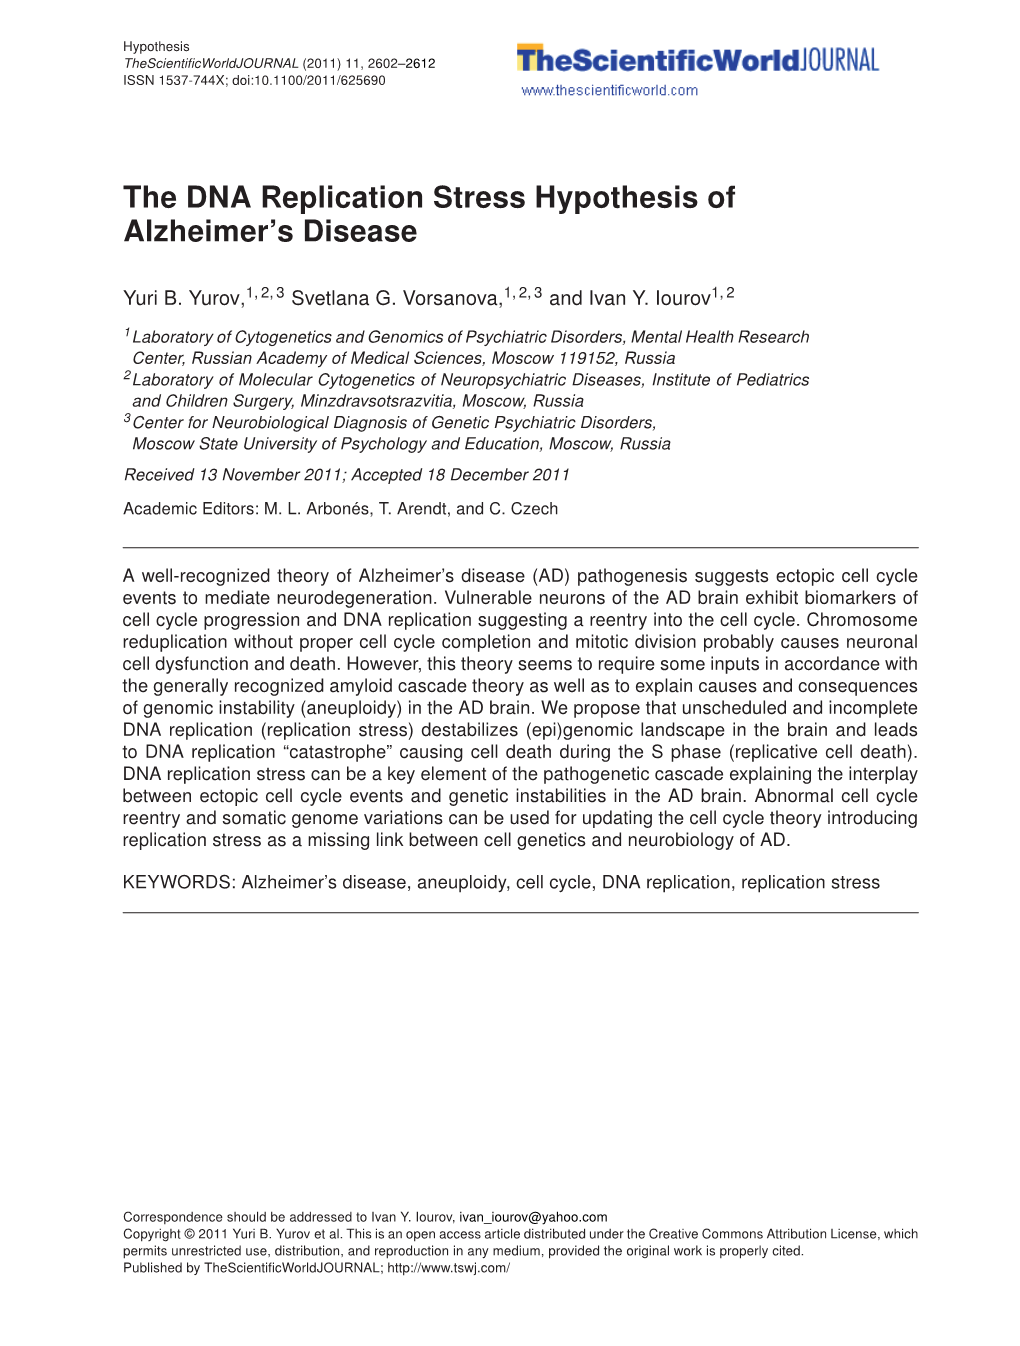 The DNA Replication Stress Hypothesis of Alzheimer's